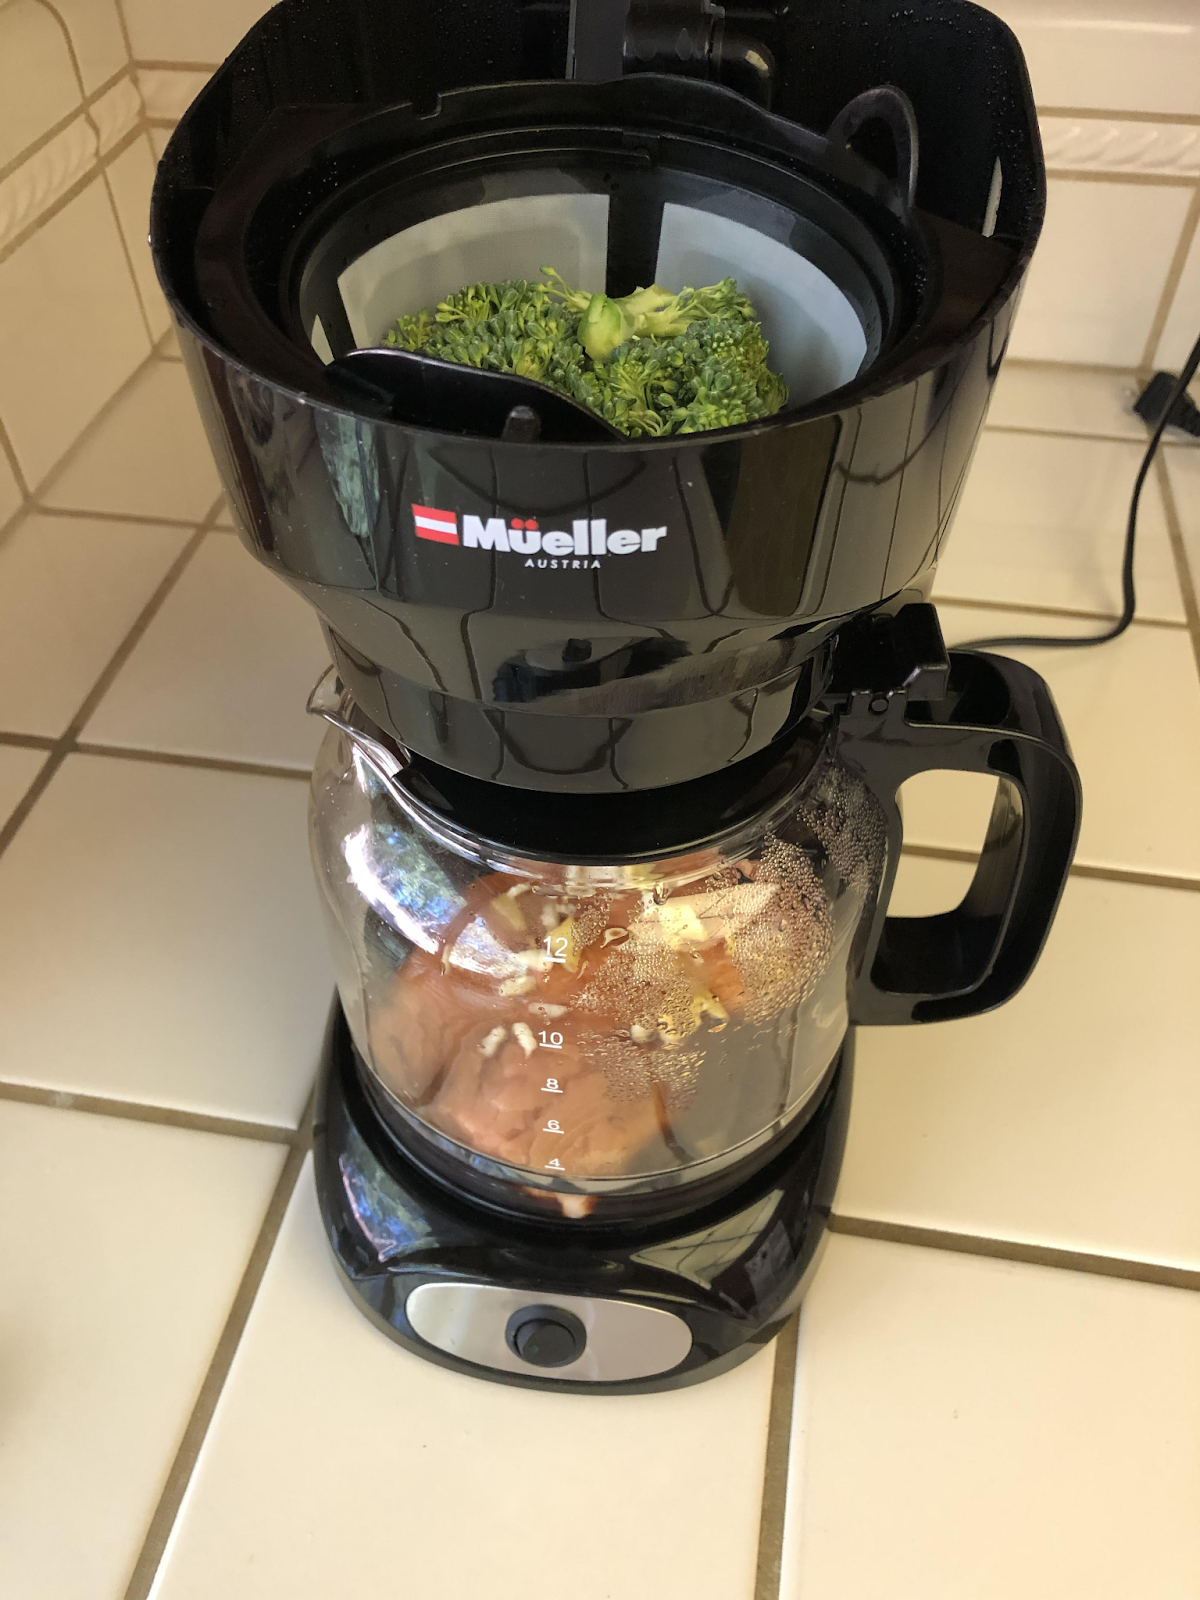 Dorm room meals… with only a coffee maker?